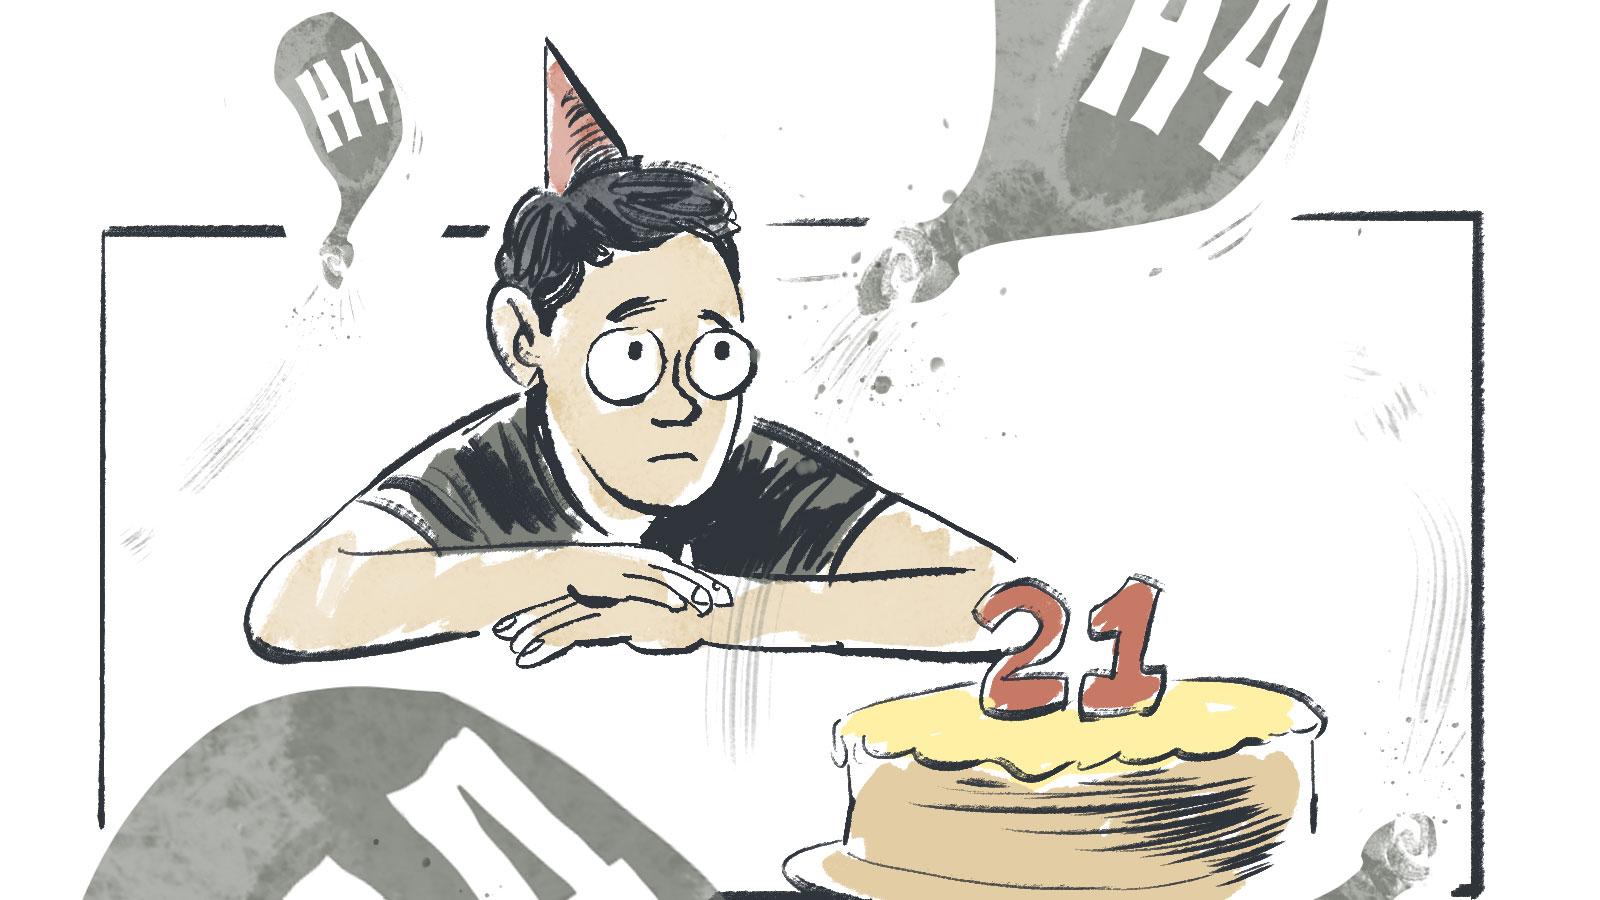 In this cartoon, a frowning boy in a pointed birthday hat sits in front of a cake with '21' written on it.